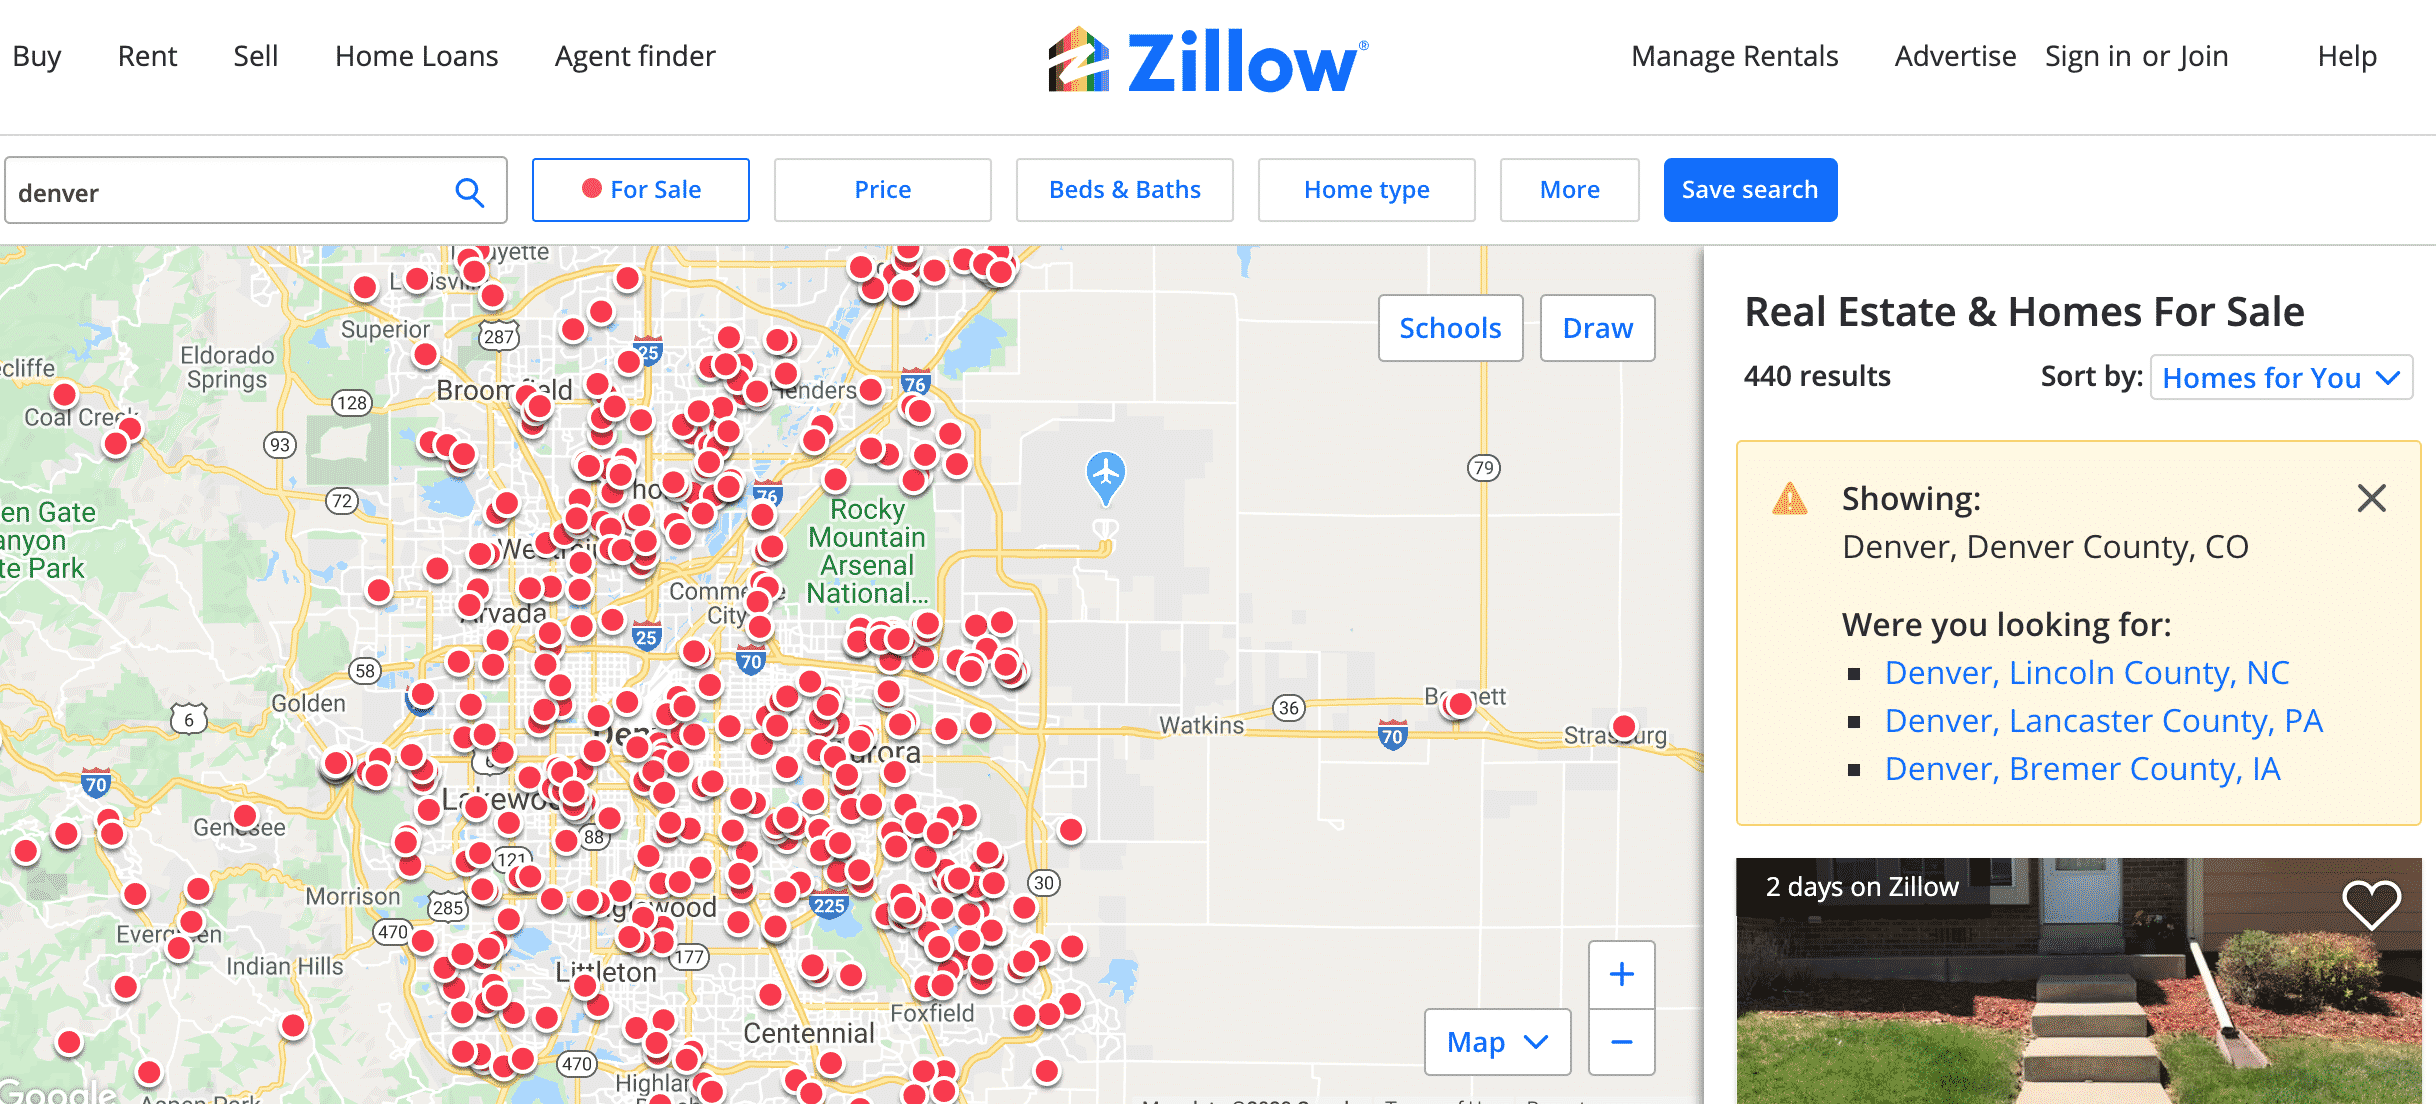 Zillow search shows over 400 FSBOs